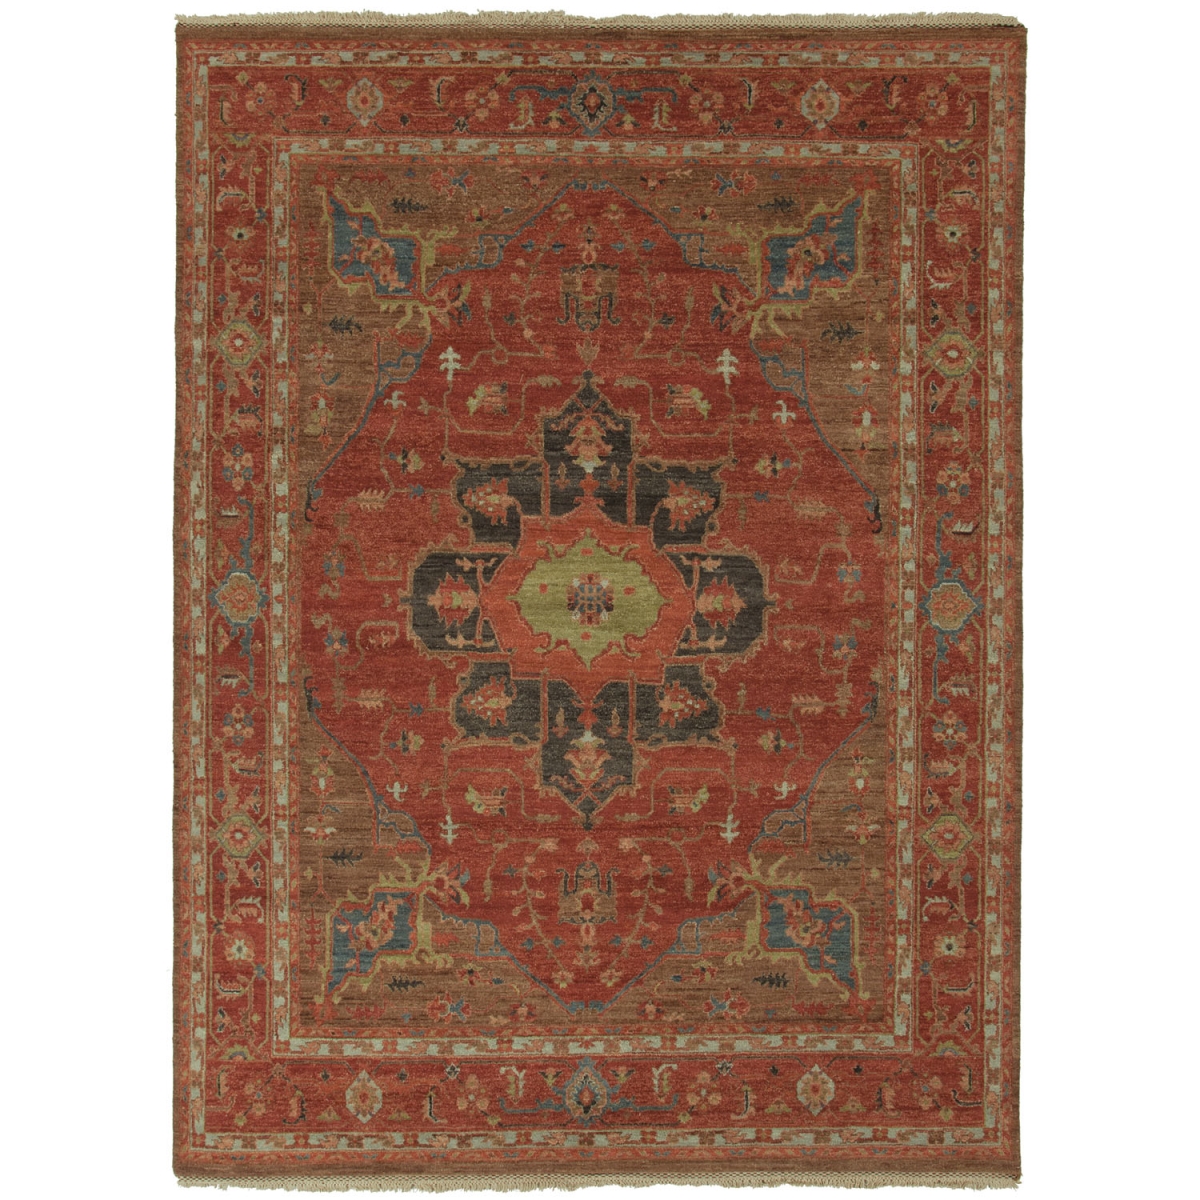 Rug104274 8 X 10 Ft. Uptown Artemis York Hand-knotted Medallion Red & Brown Area Rug